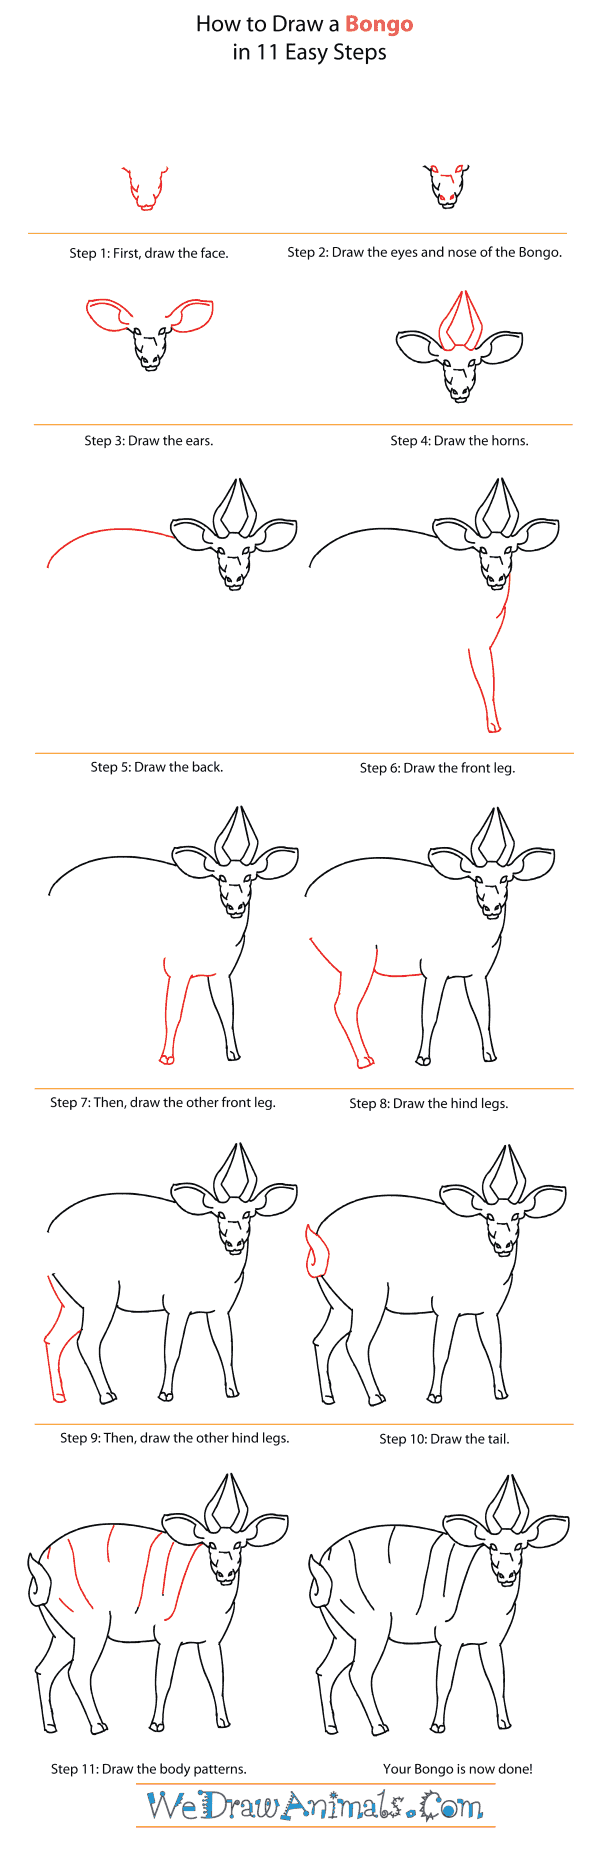 How to Draw a Bongo - Step-By-Step Tutorial